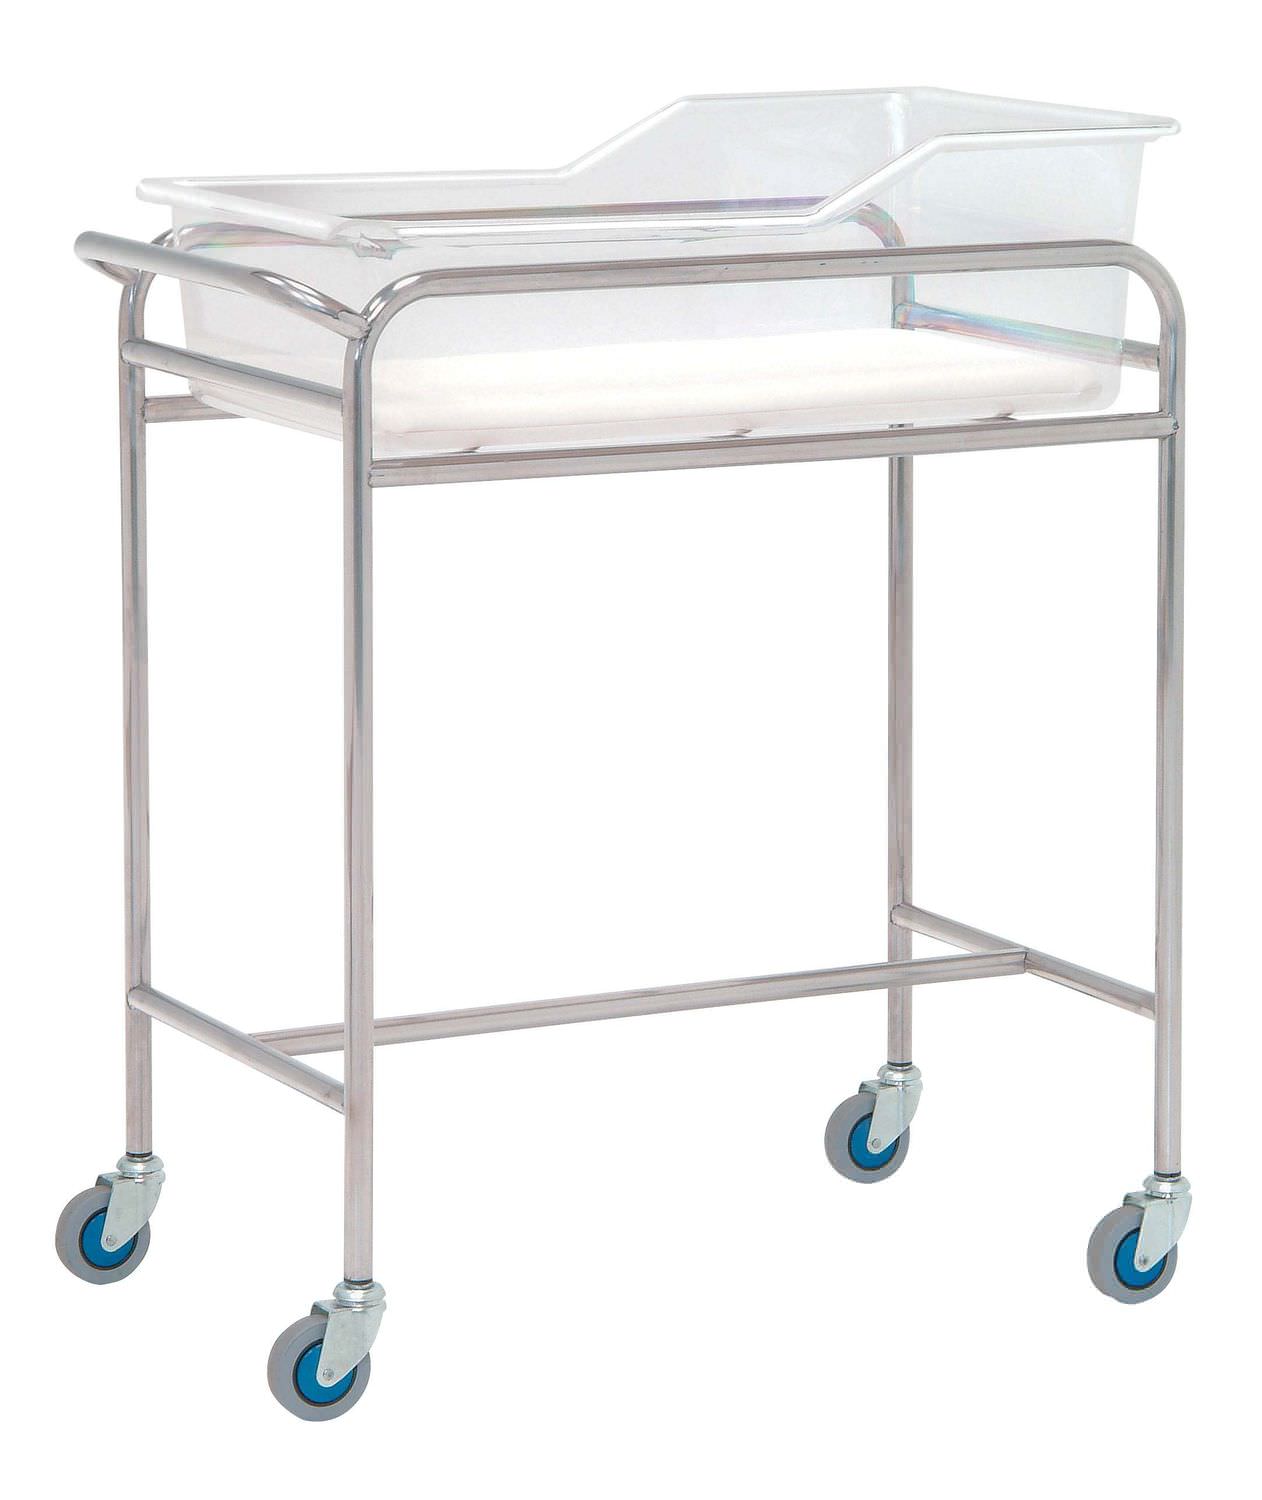 Stainless steel hospital baby bassinet / transparent 12101 Inmoclinc